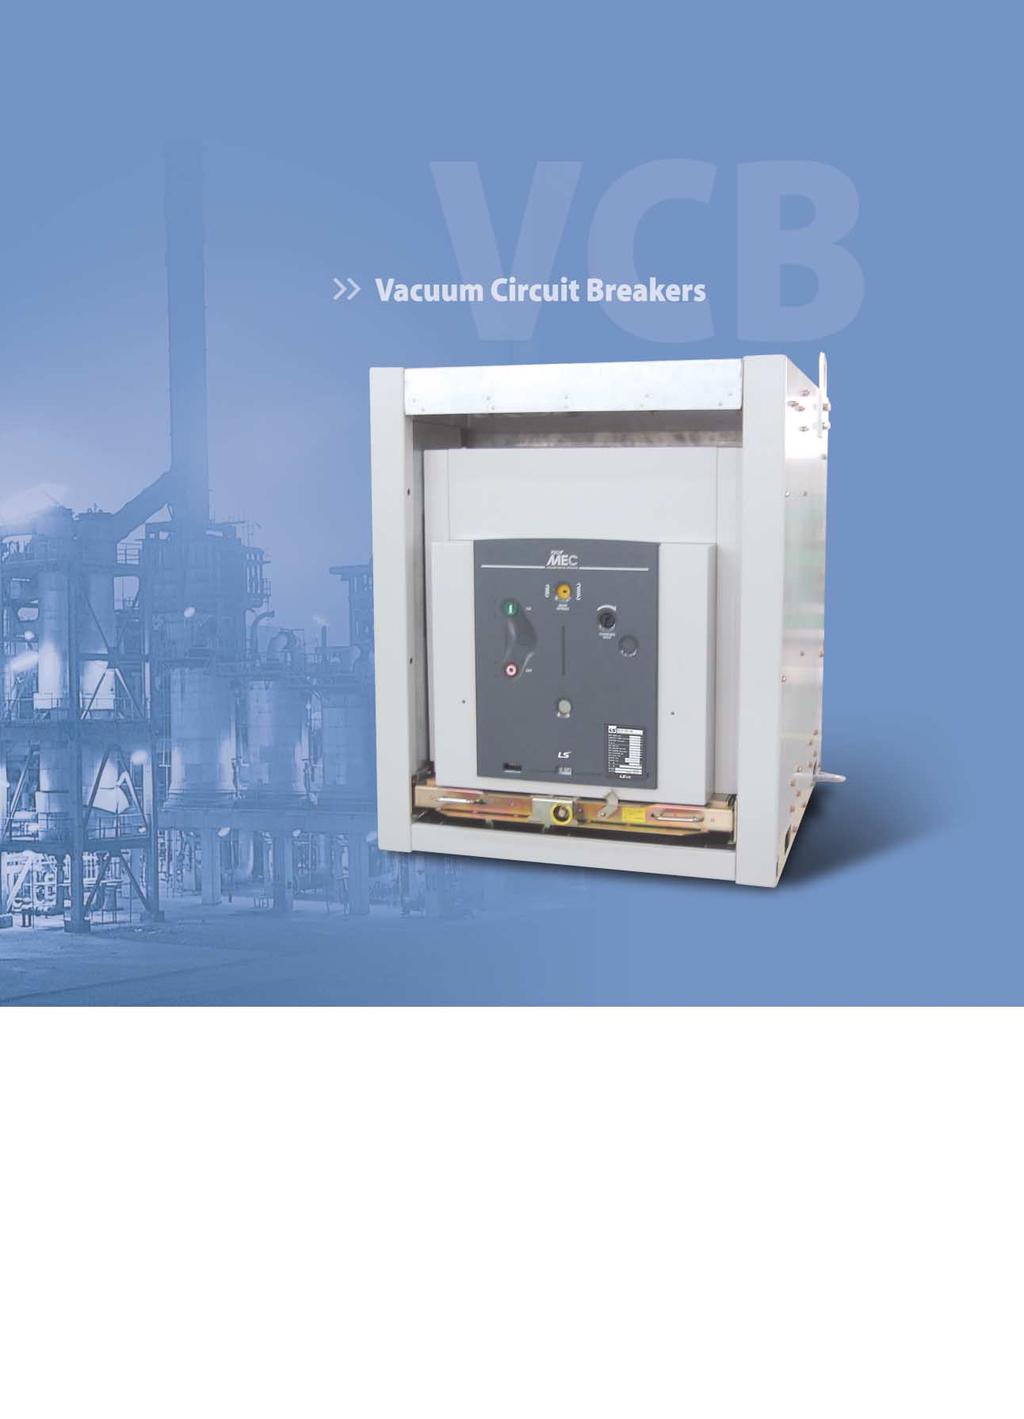 Vacuum Circuit Breakers for Nuclear Power Plants VCB Full Option To prevent fatal error, property and life loss caused from operator during operation, it is equipped with safety mechanisms such as